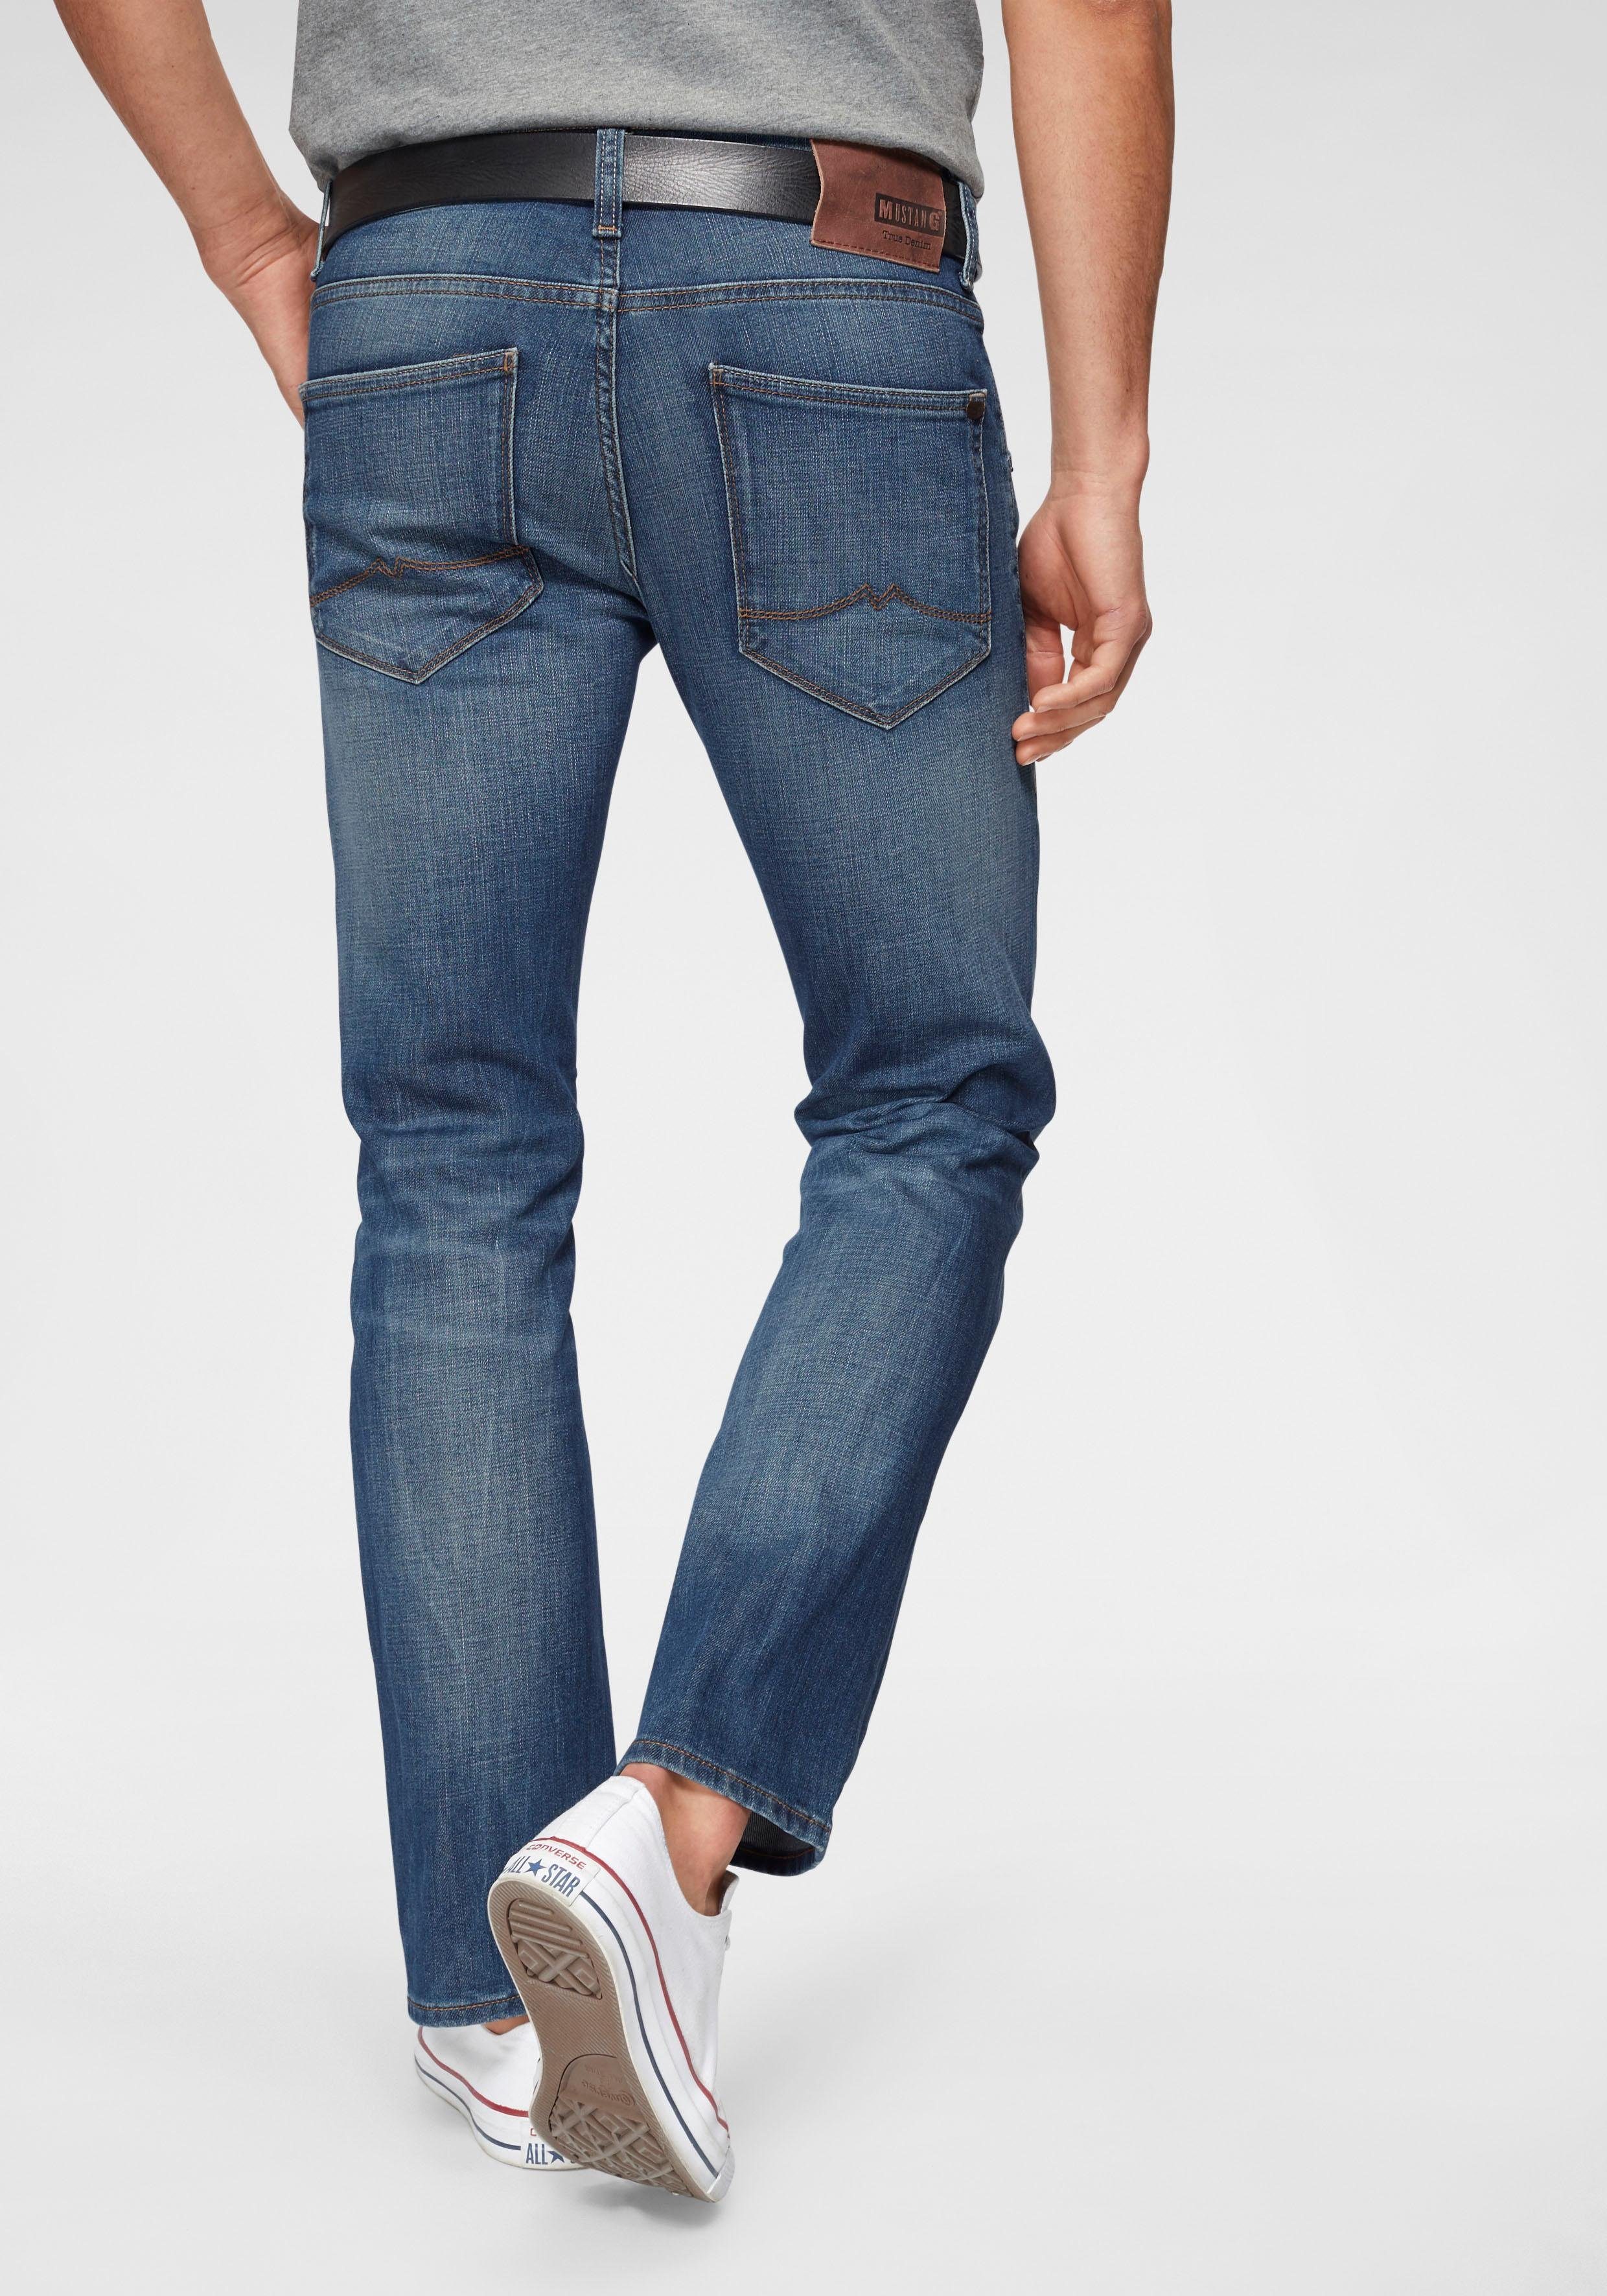 in 5-Pocket-Form Straight-Jeans STYLE MUSTANG light-scratched-used MICHIGAN STRAIGHT